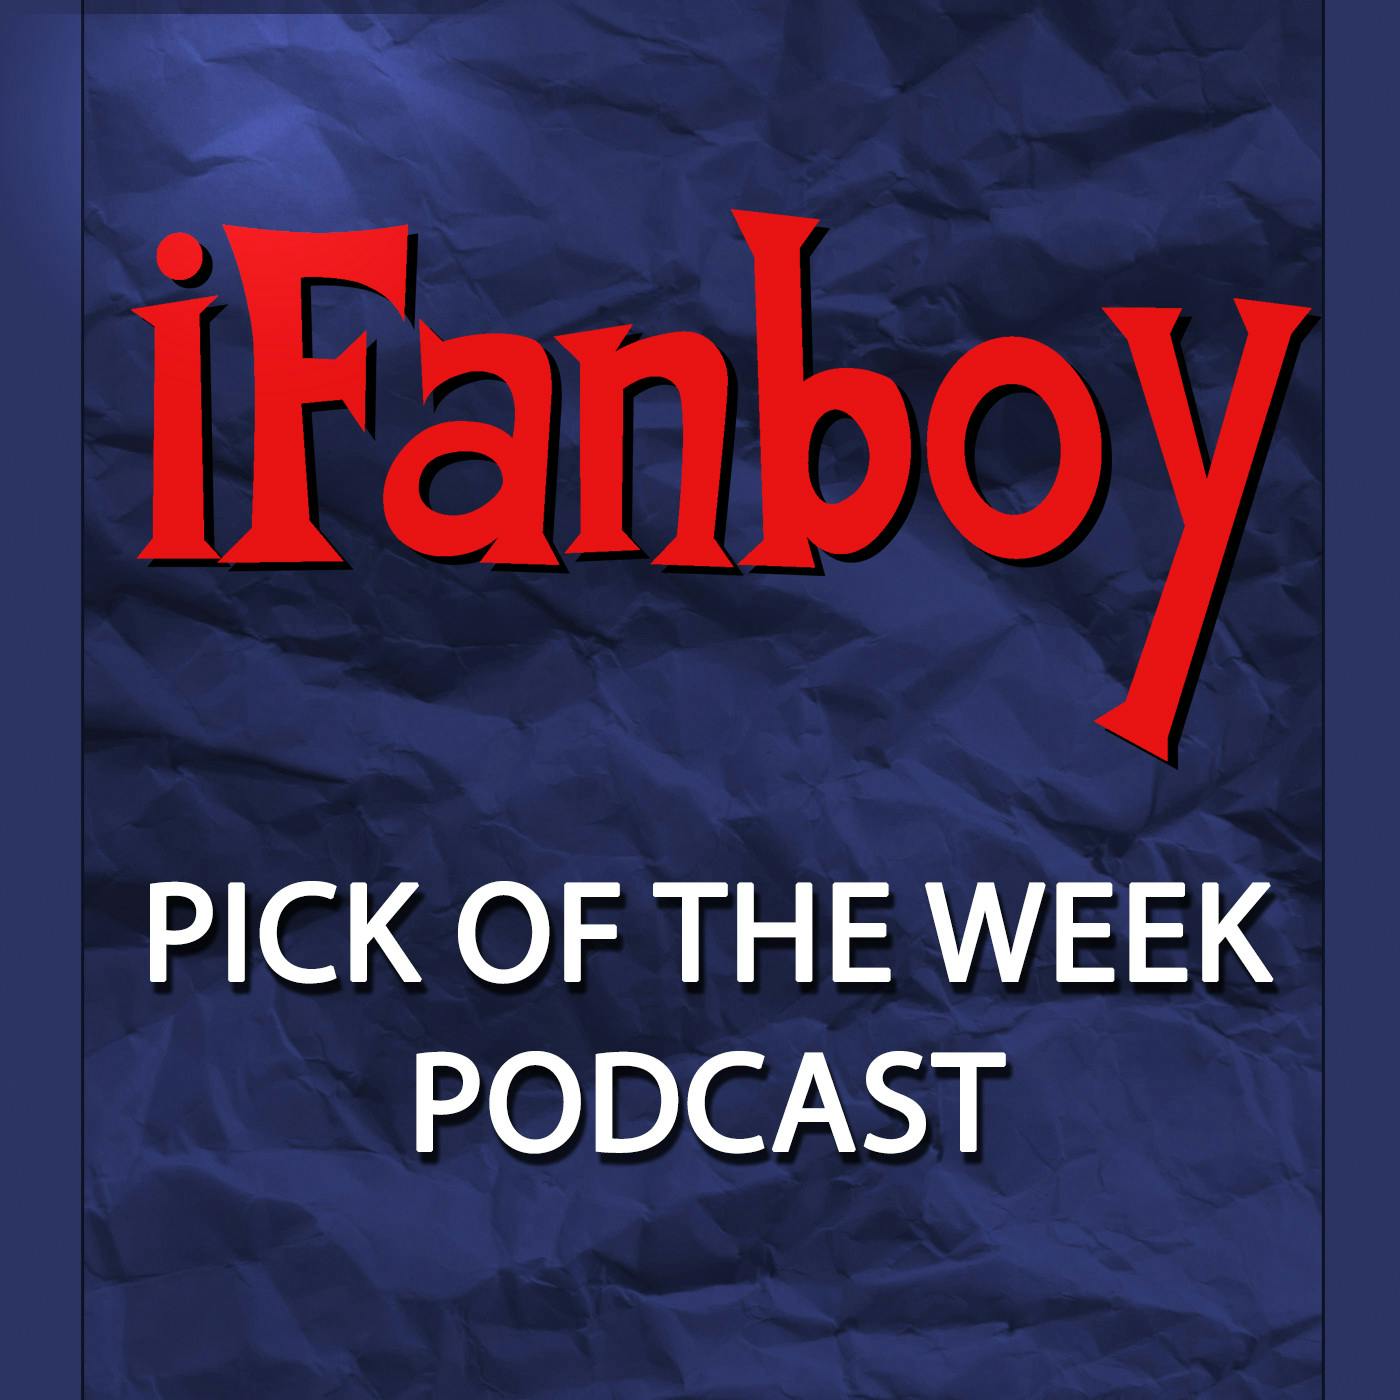 Pick of the Week #803 - The Flash #775